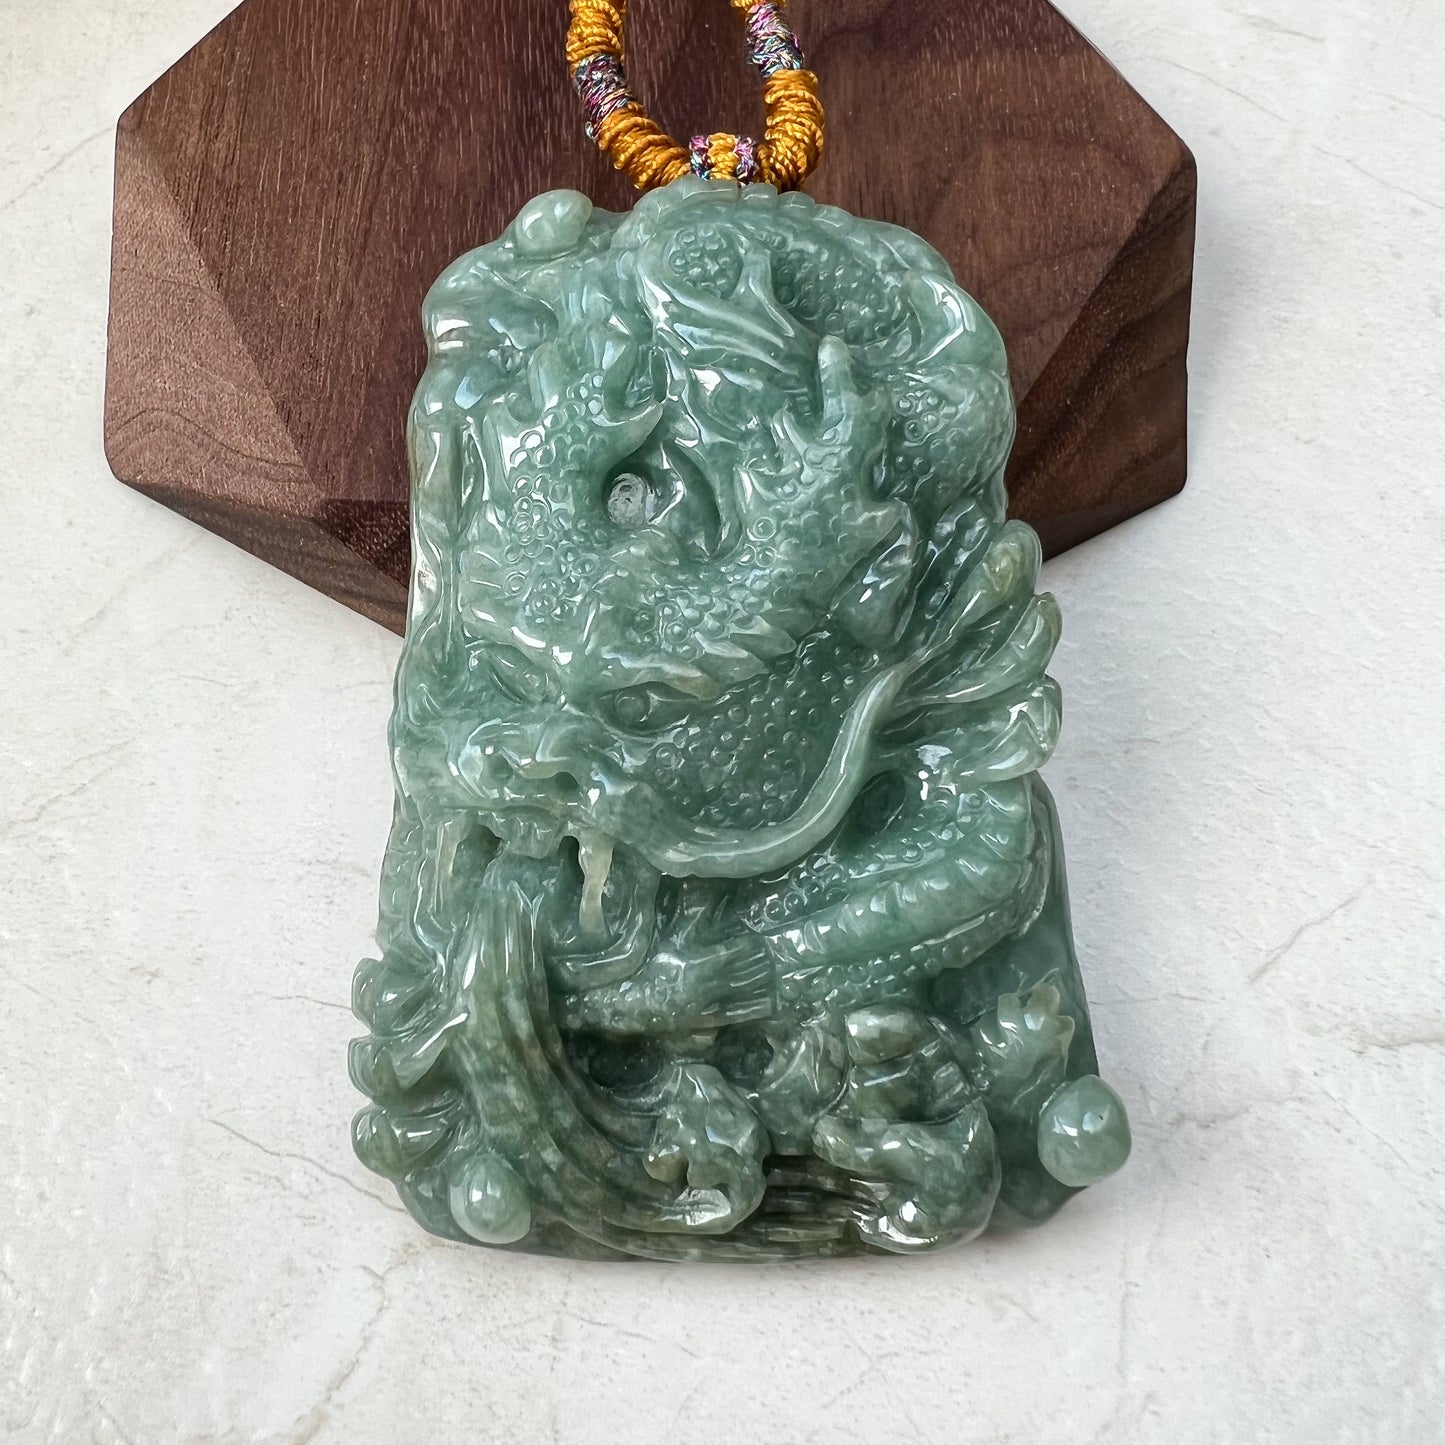 Large Dragon, Jadeite Jade, Green, Chinese Zodiac Hand Carved Pendant Necklace, YJ-0921-0061224 - AriaDesignCollection